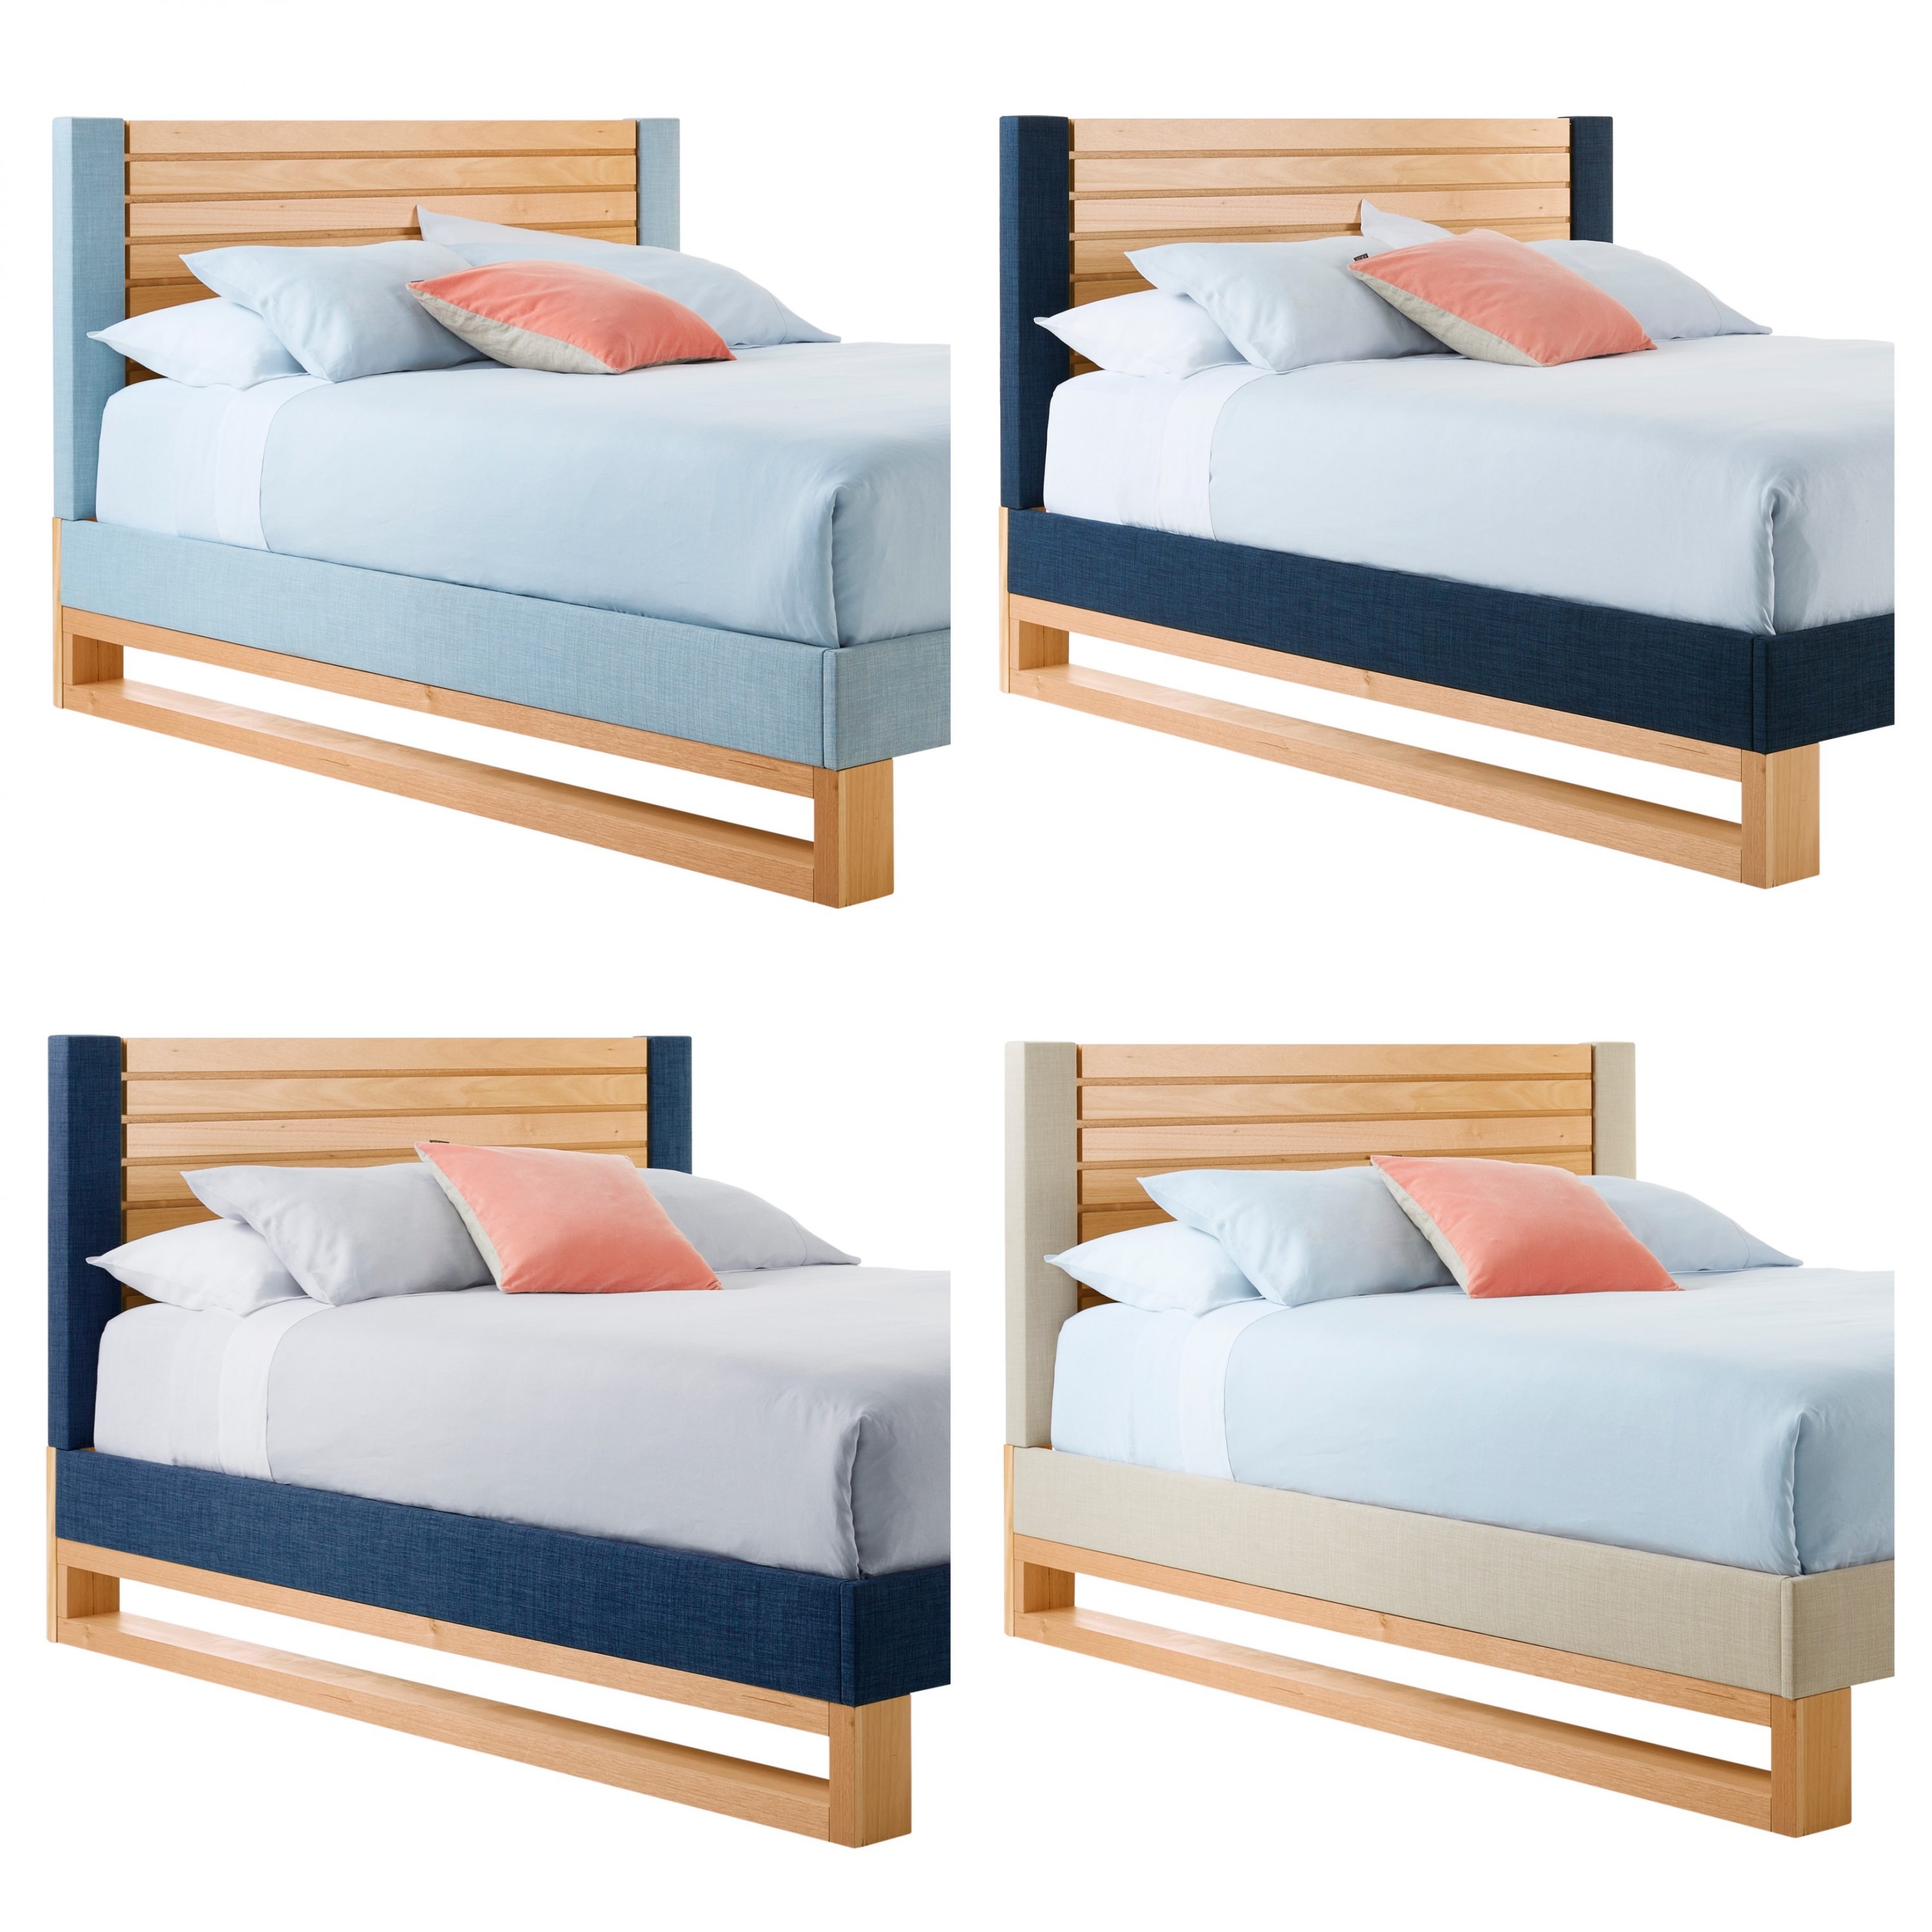 forty winks childrens beds